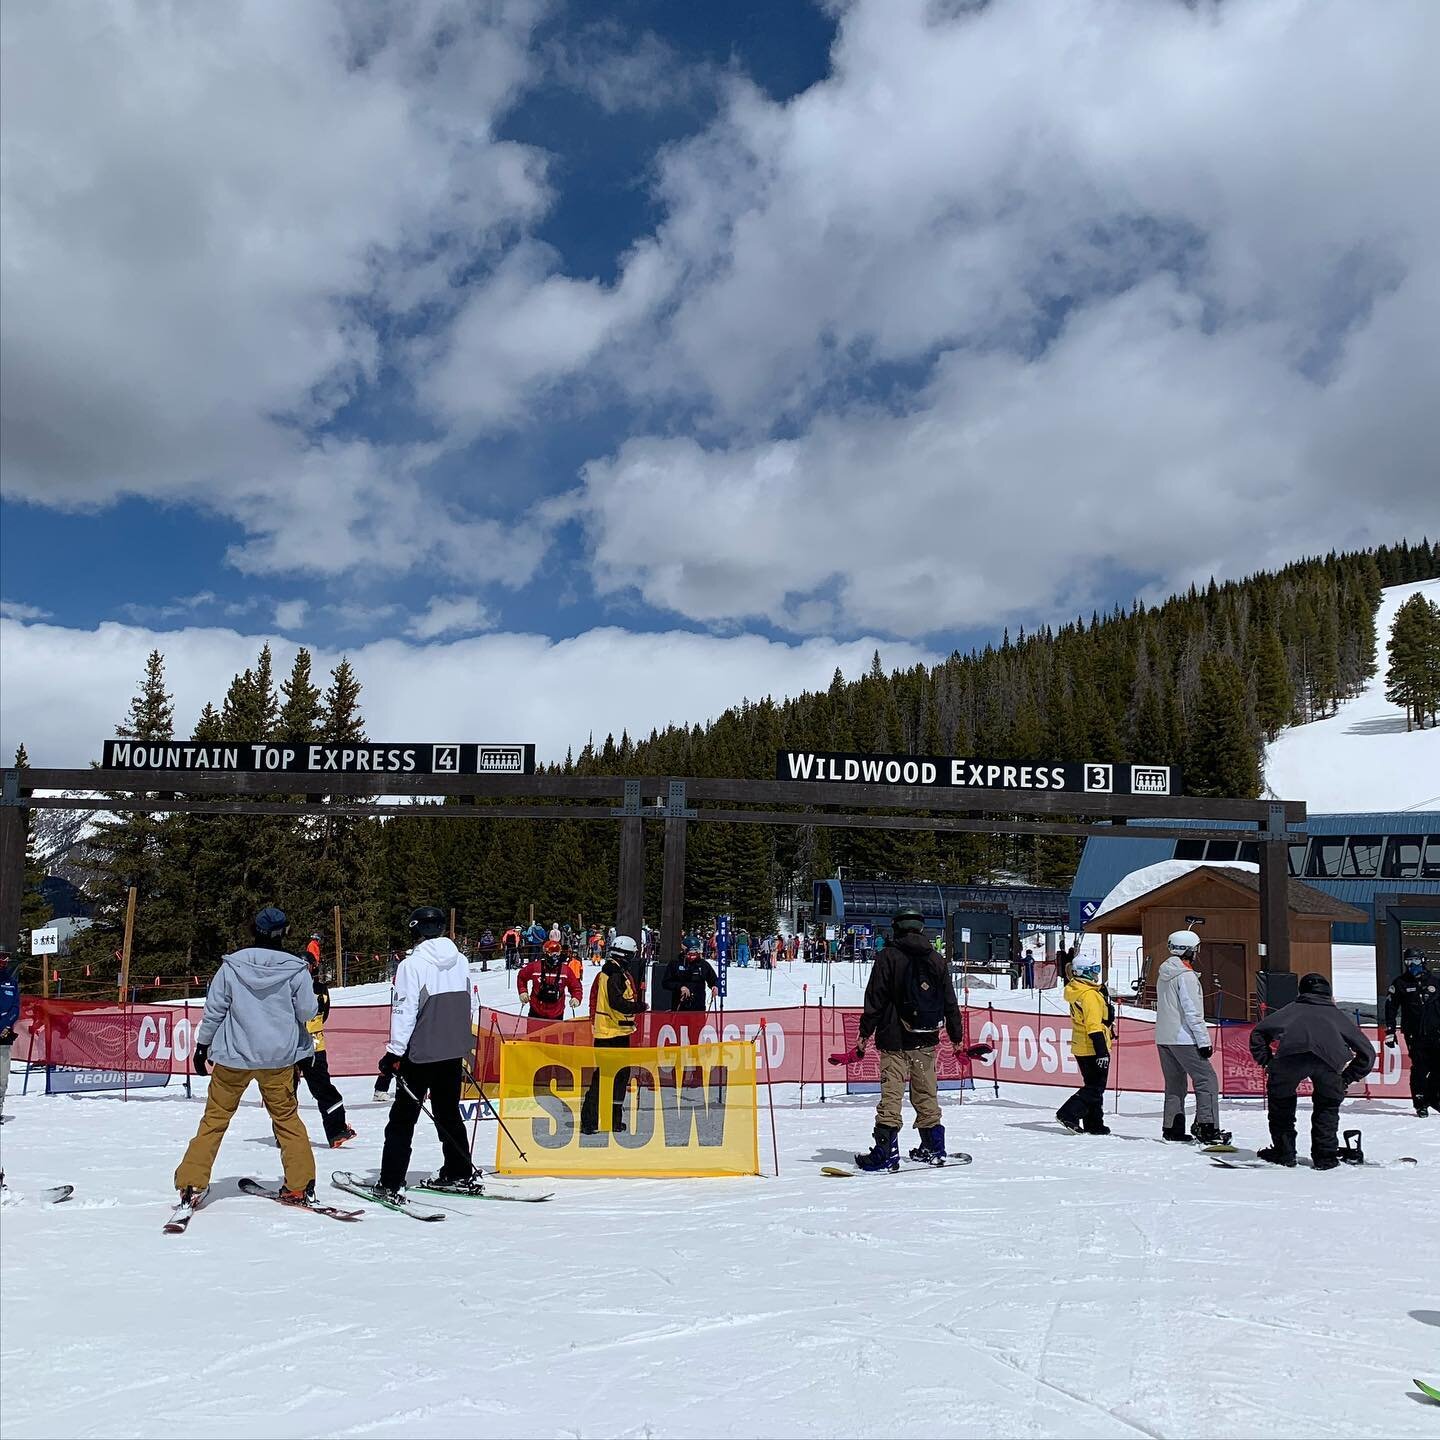 Upper lifts closed at 2:30 today. 😫Didn&rsquo;t get to ride Chair 5 one last time. 🥺 Forever, we will see you next year. #vailmtn #springskiing #backcountryskiing #fun